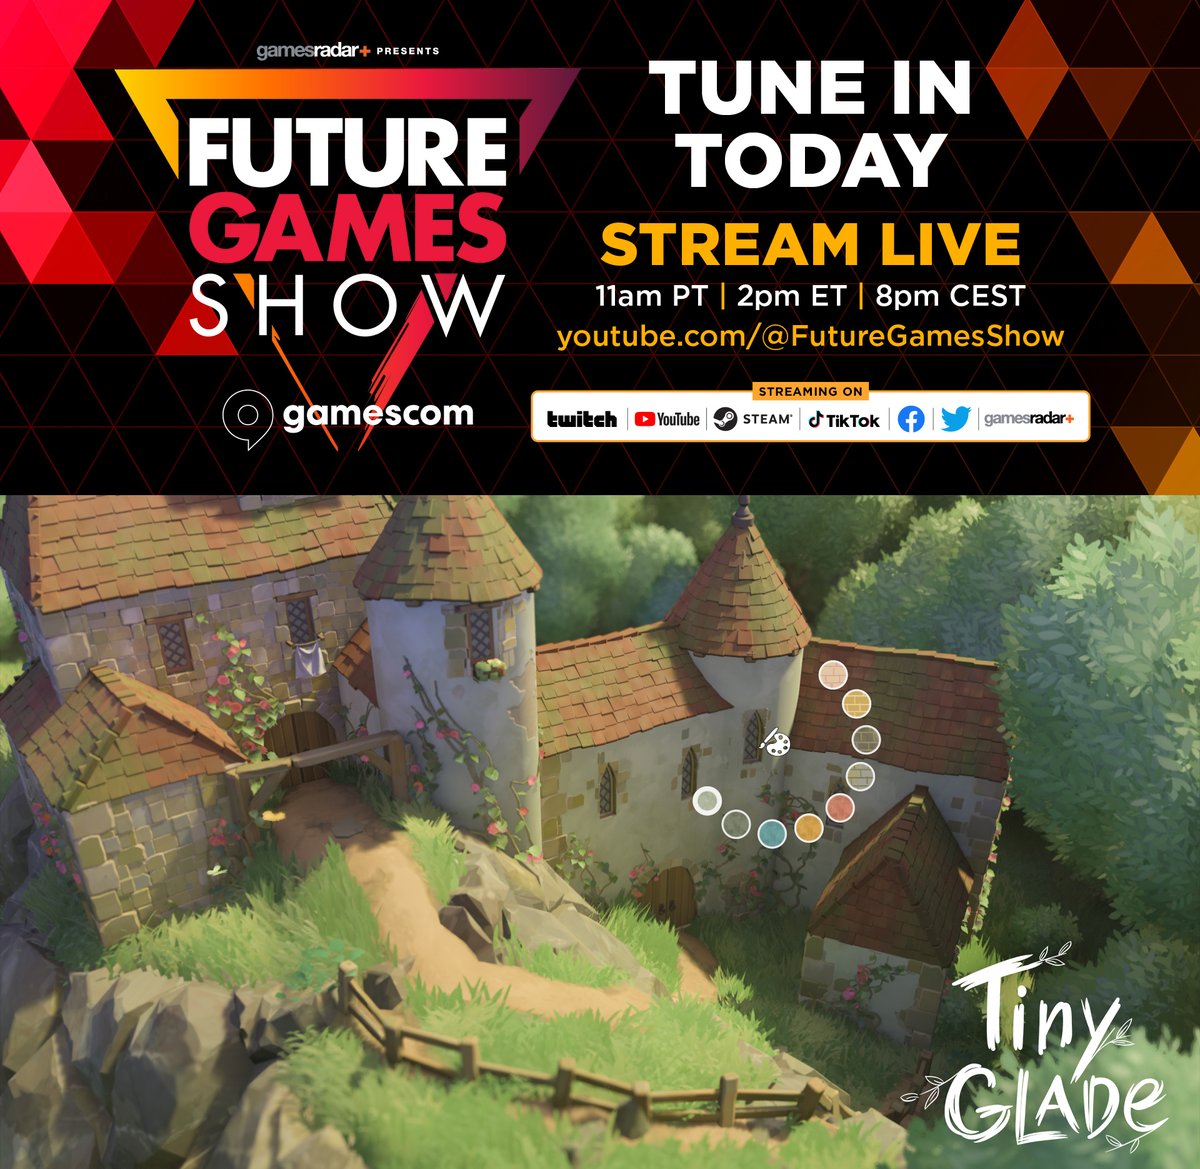 It's been a year since we went full-time on Tiny Glade, 2y since it was my hobby. To have our trailer featured at @futuregamesshow is mind-blowing. It hasn't fully sunk in yet 😄 We've poured a lot of love into game. I hope it shows in the trailer. Thanks for having us, FGS! 💖